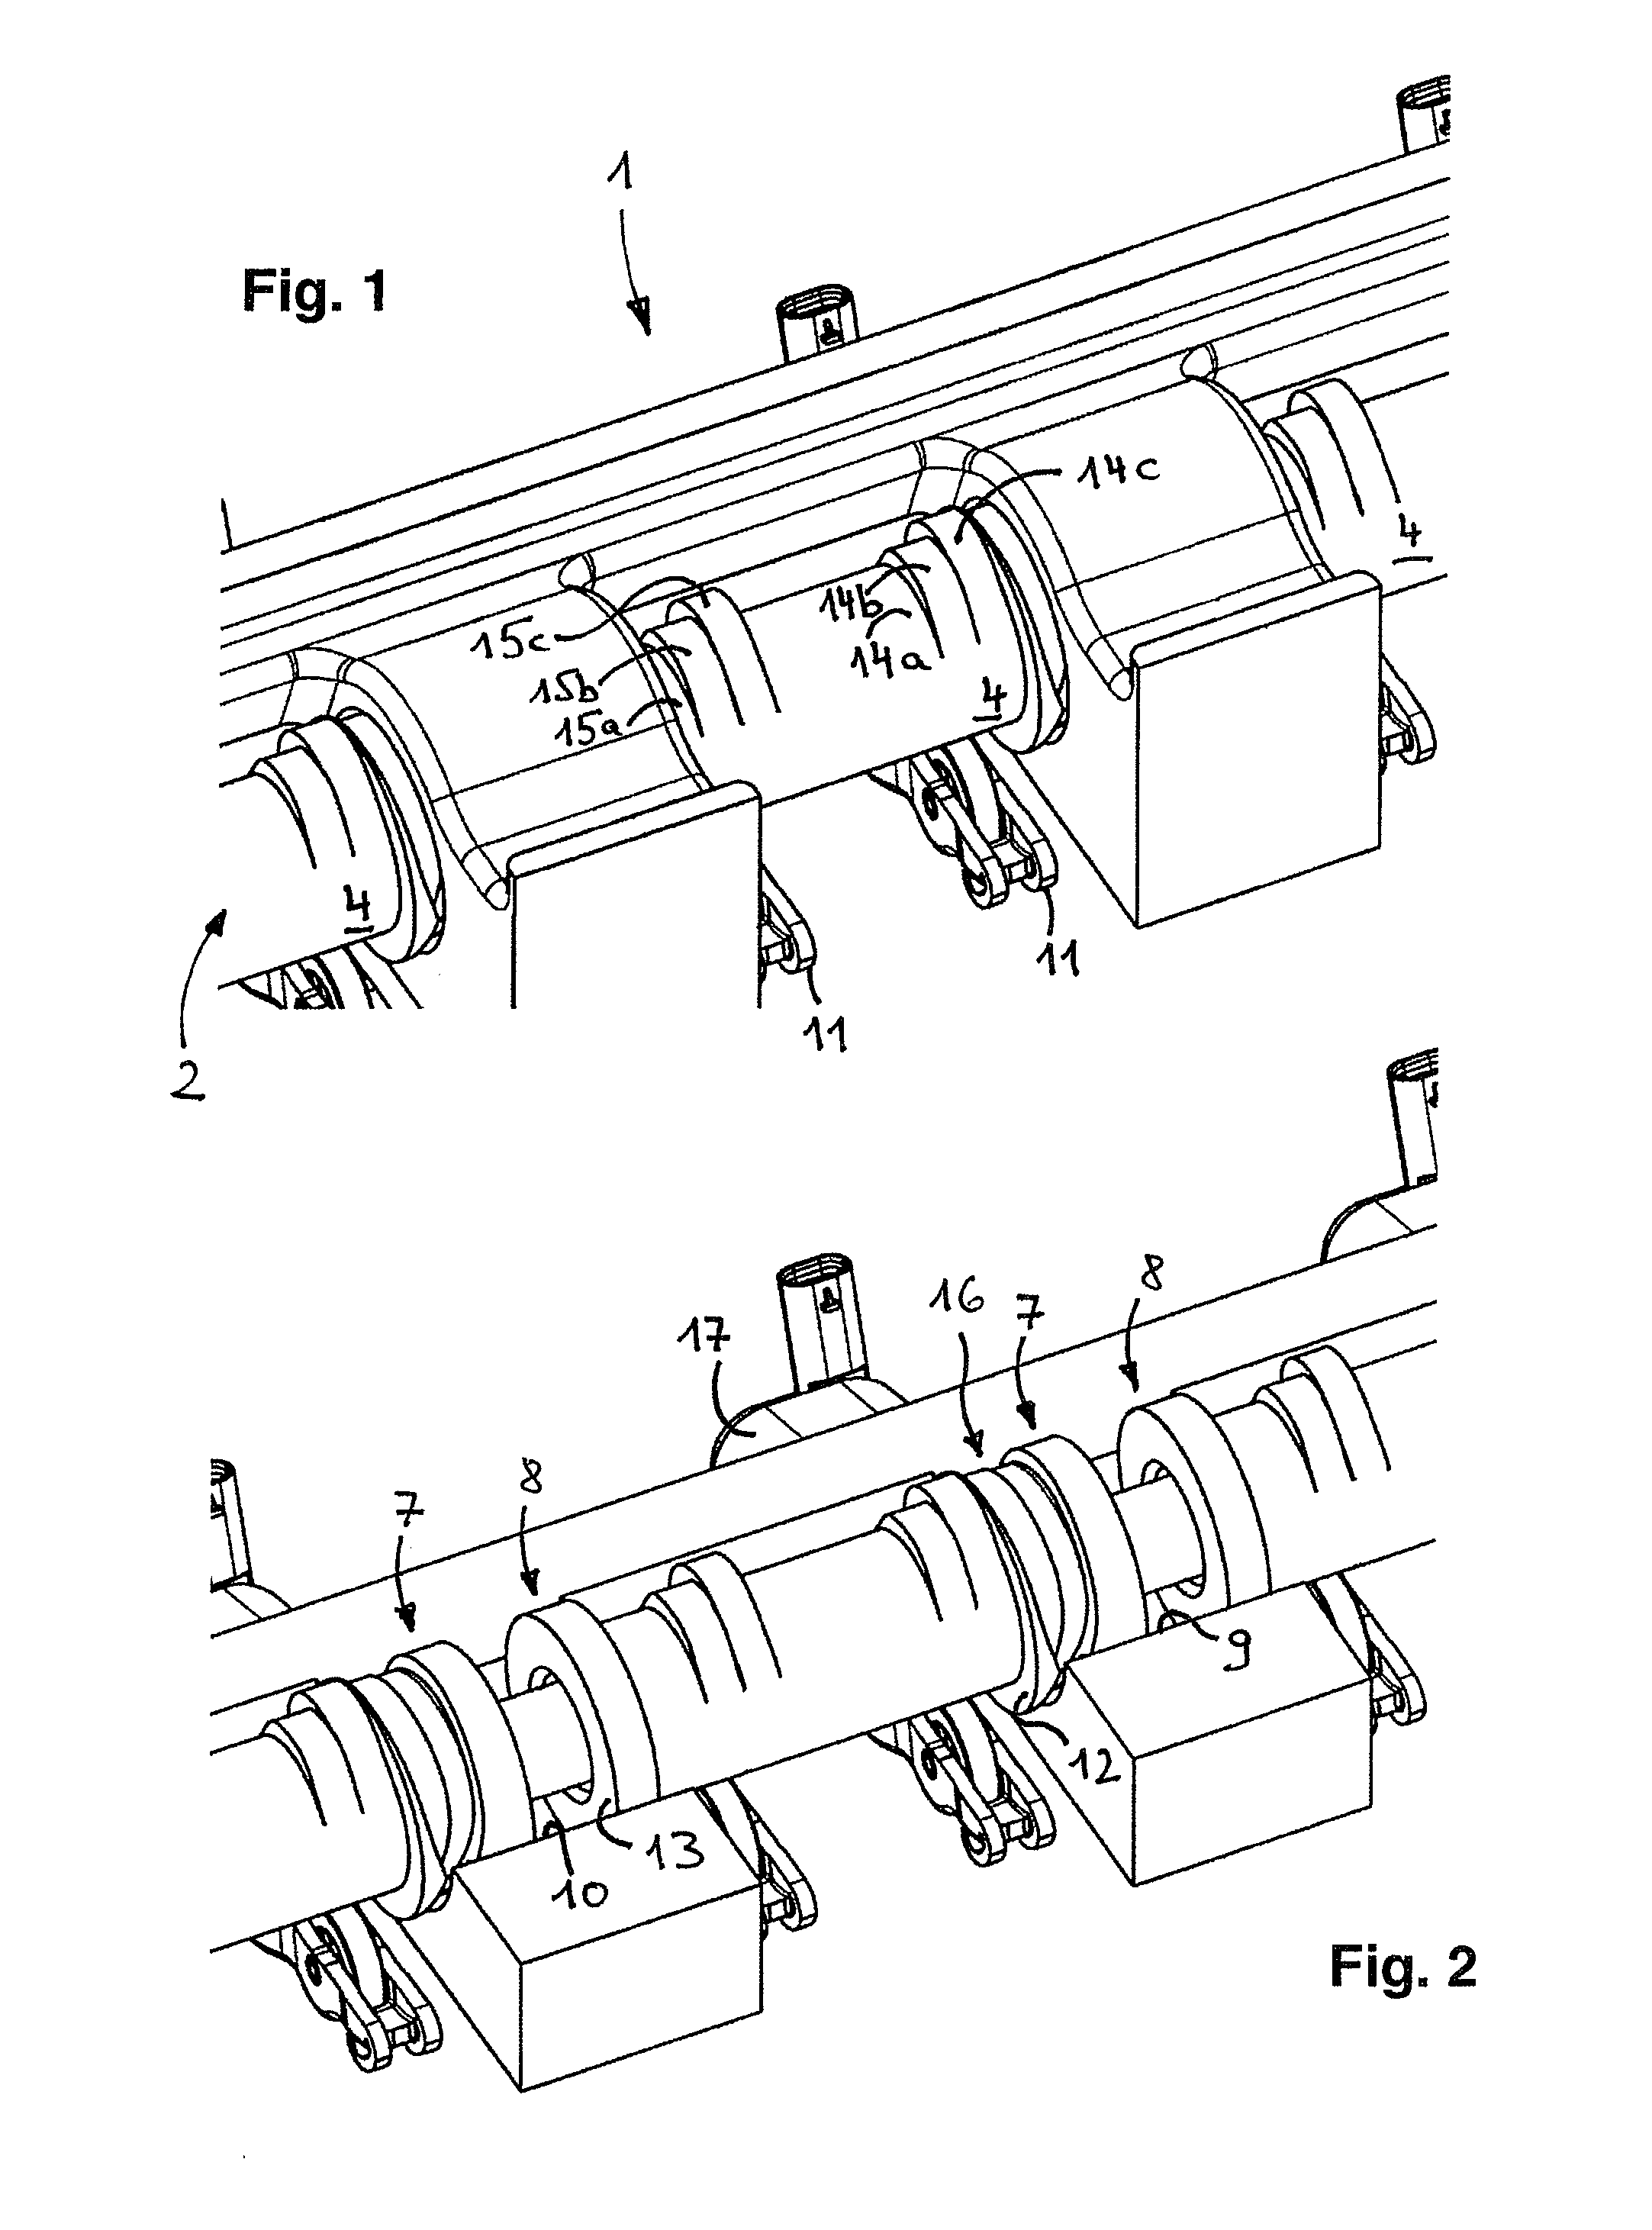 Valve drive of an internal combustion engine